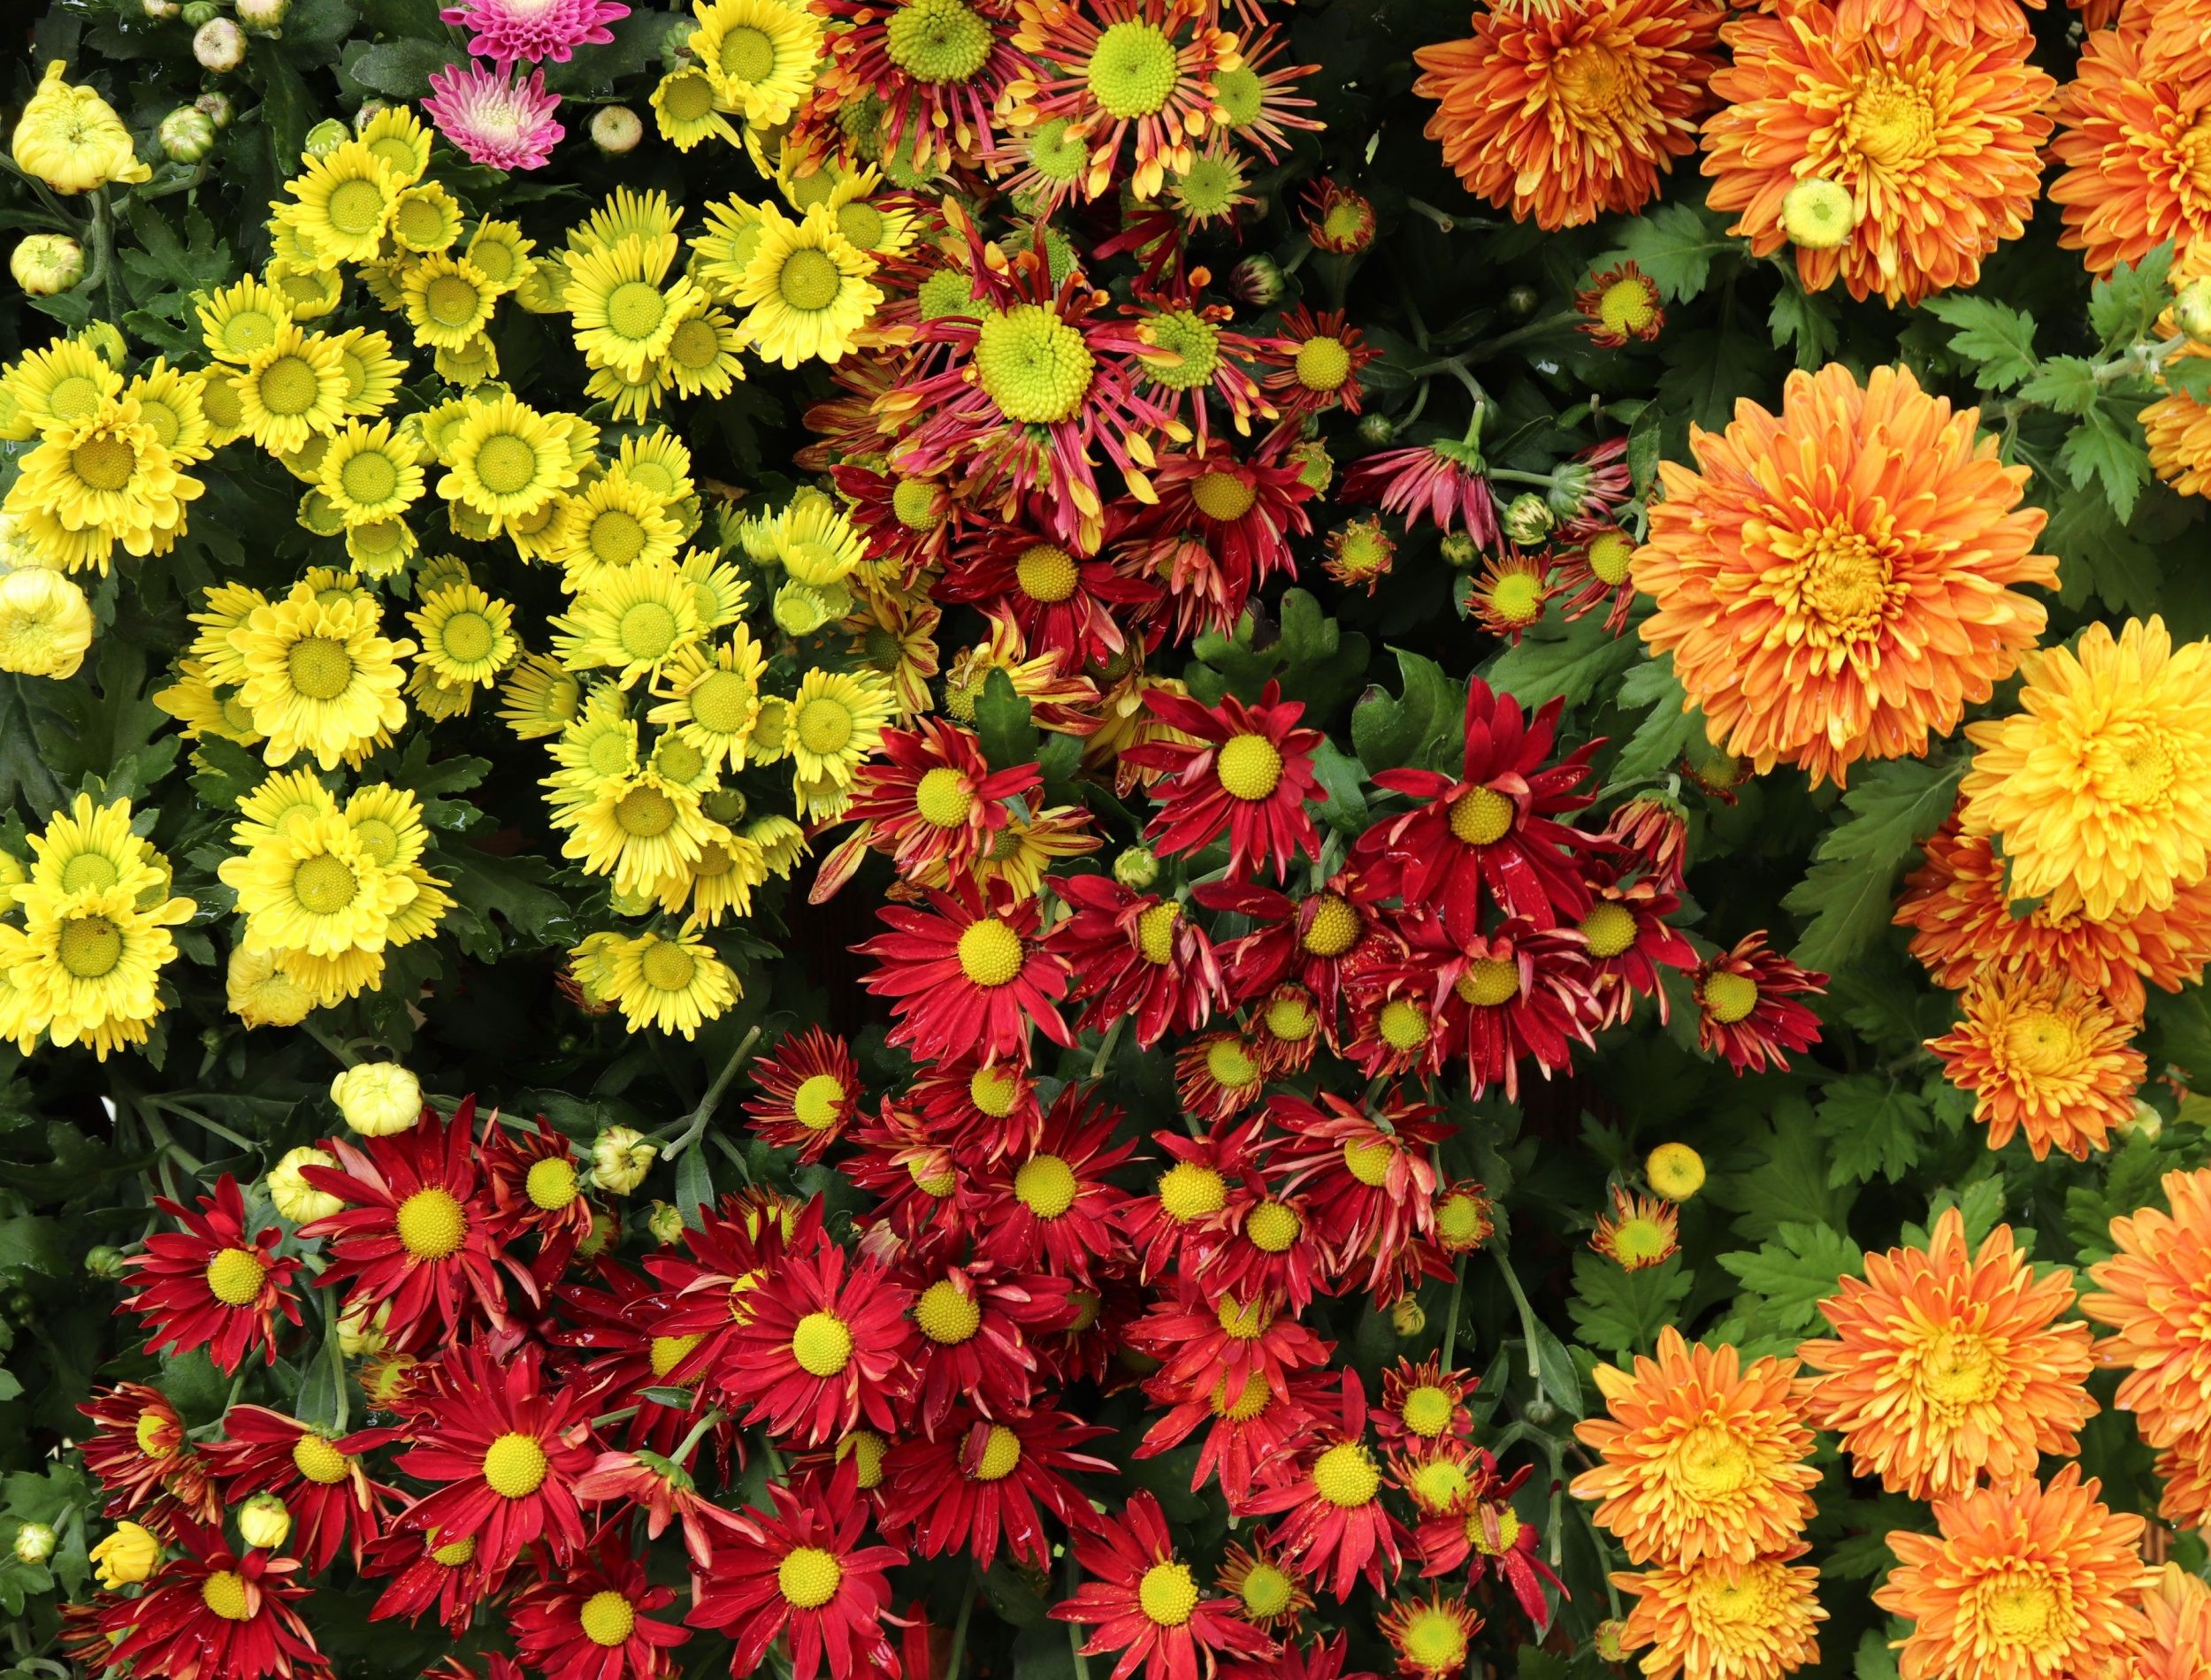 Different chrysanthemum types sometimes also called mums or chrysanths